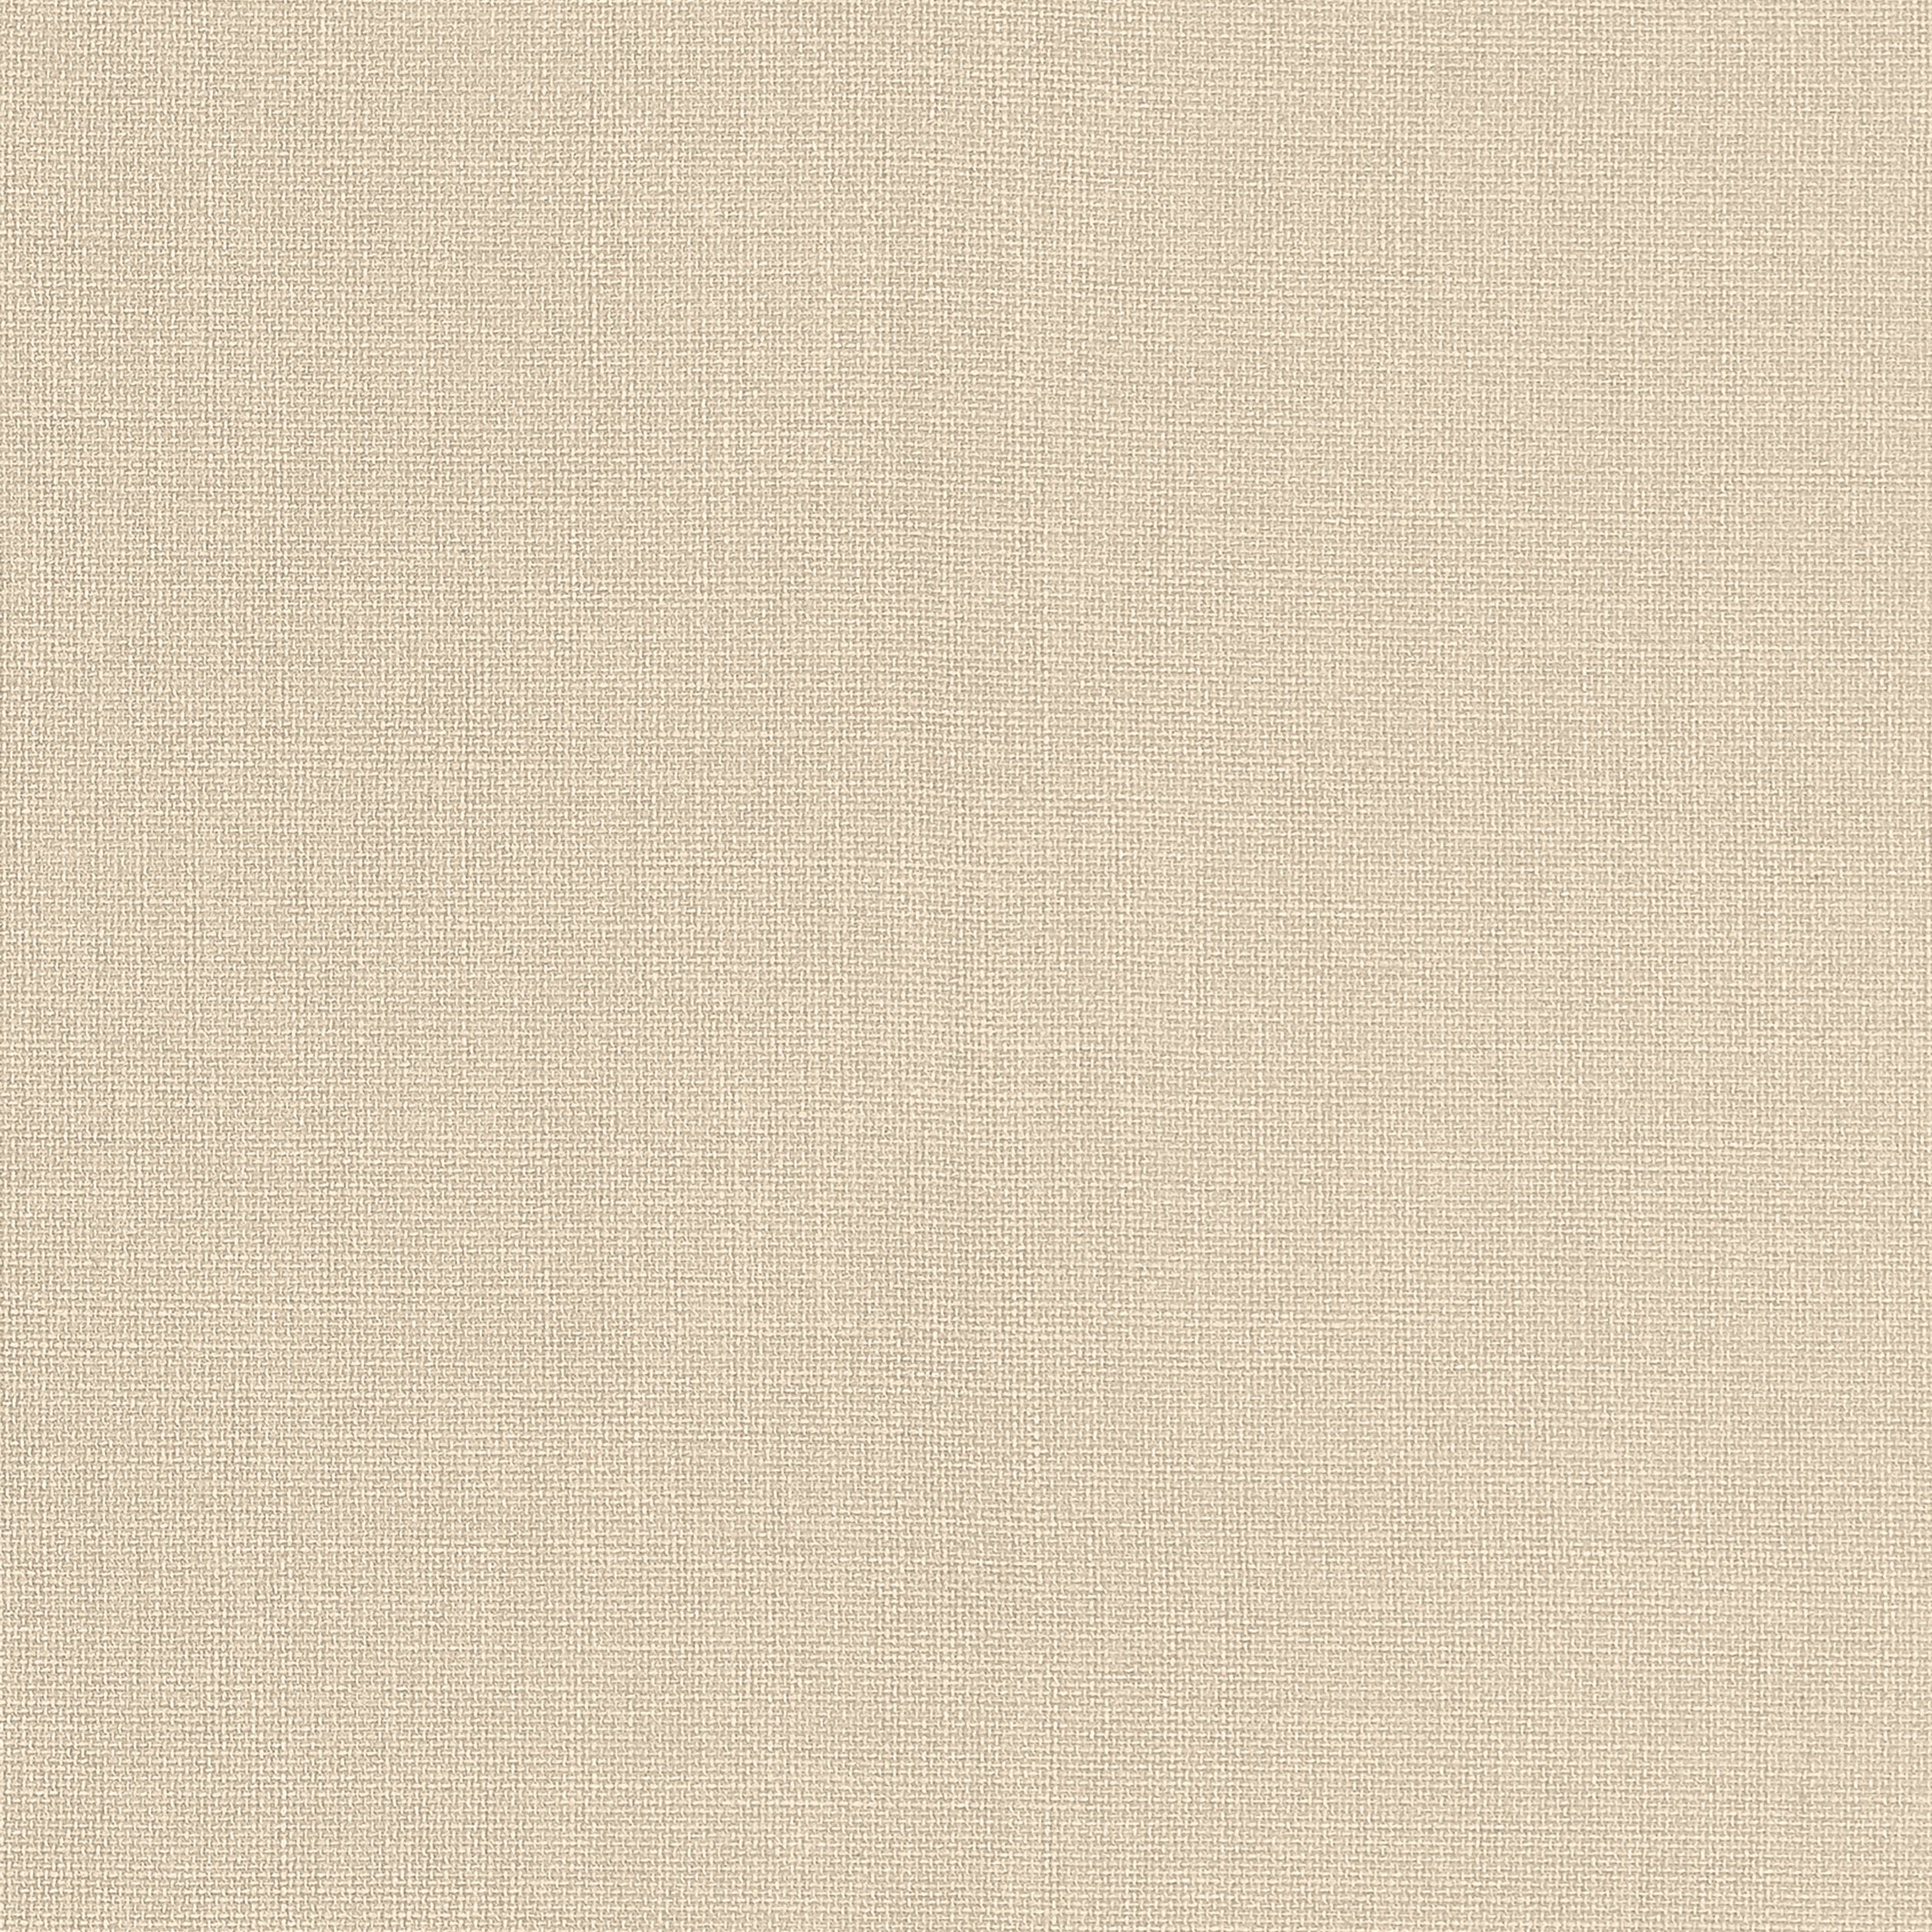 Brynn fabric in sand color - pattern number W81679 - by Thibaut in the Locale collection